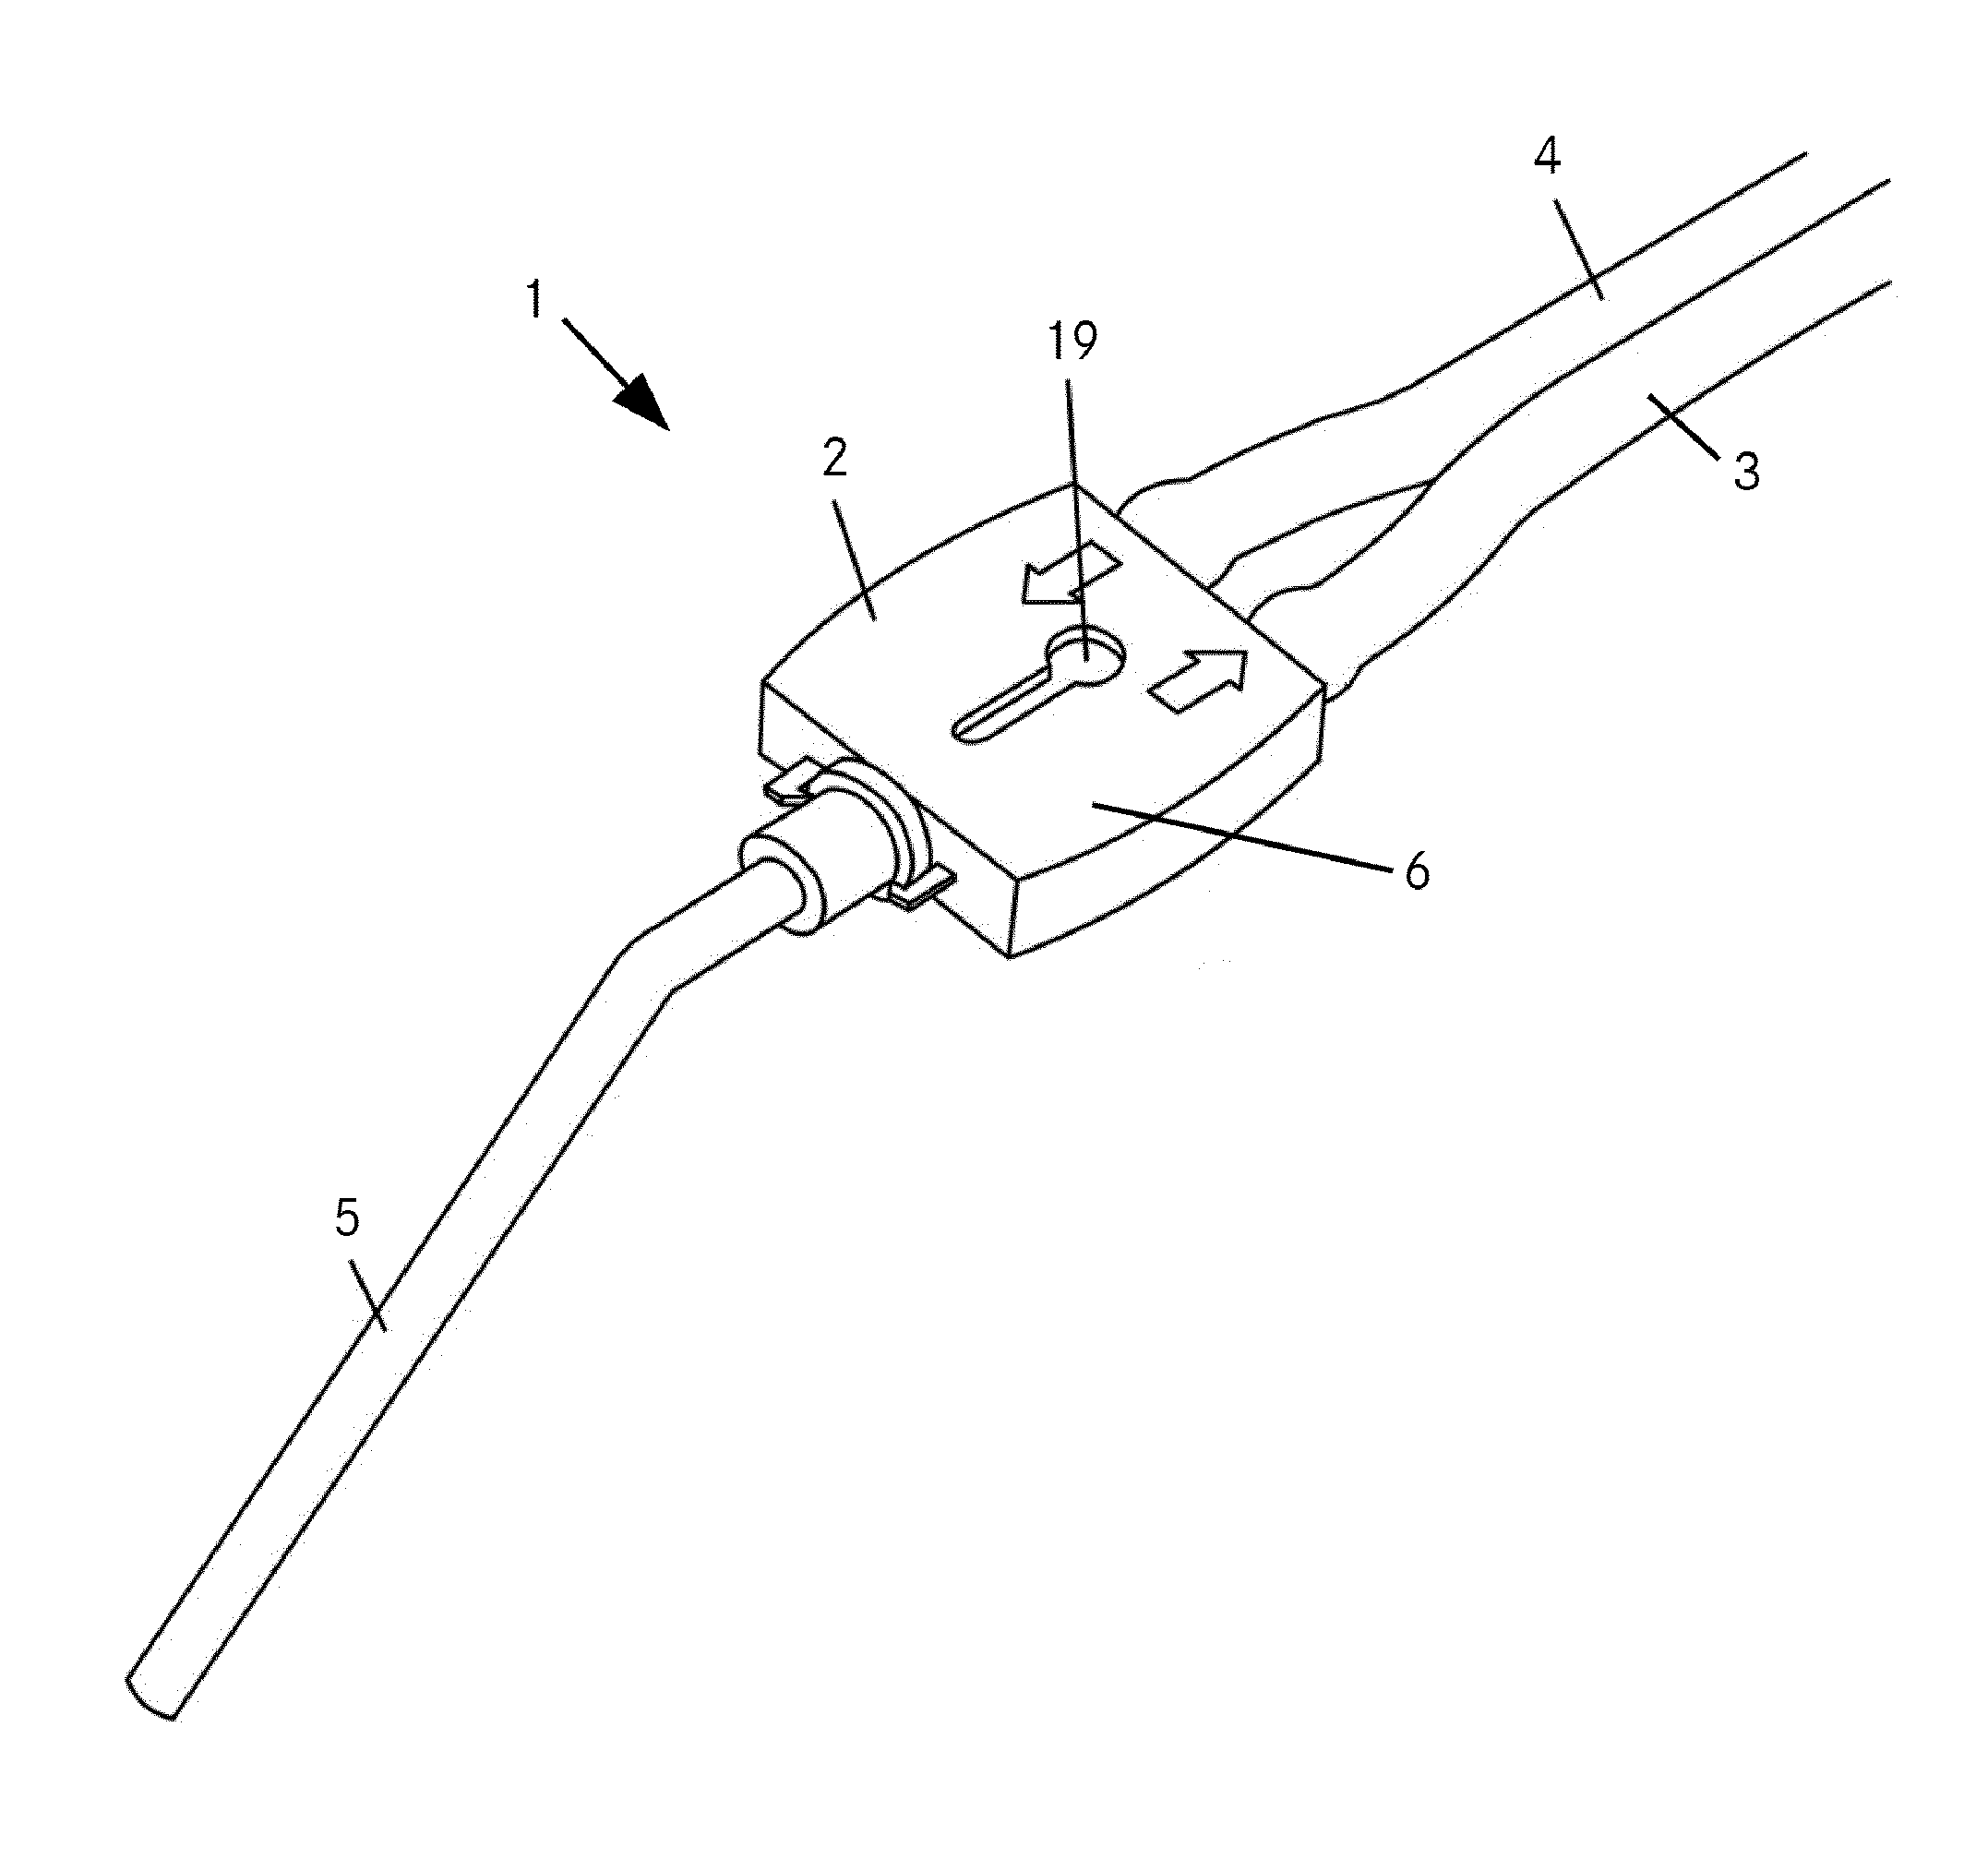 Suction and irrigation device